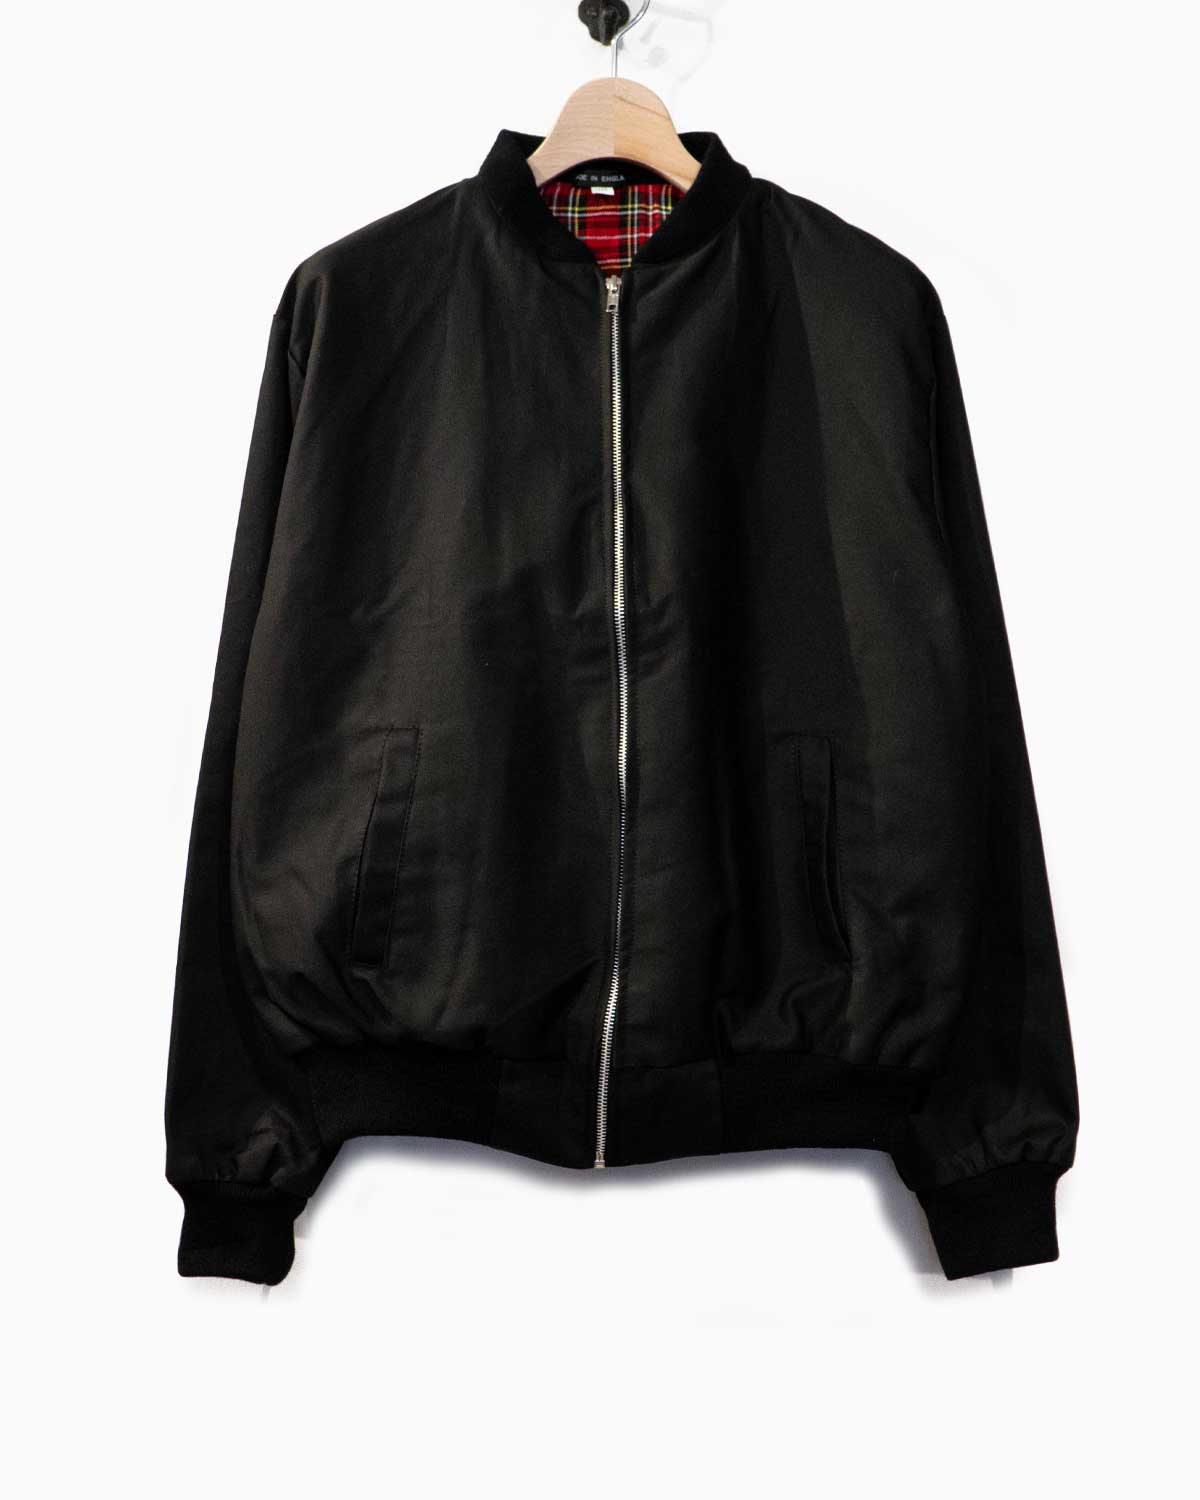 made in ENGLAND tankers Jacket BLACK